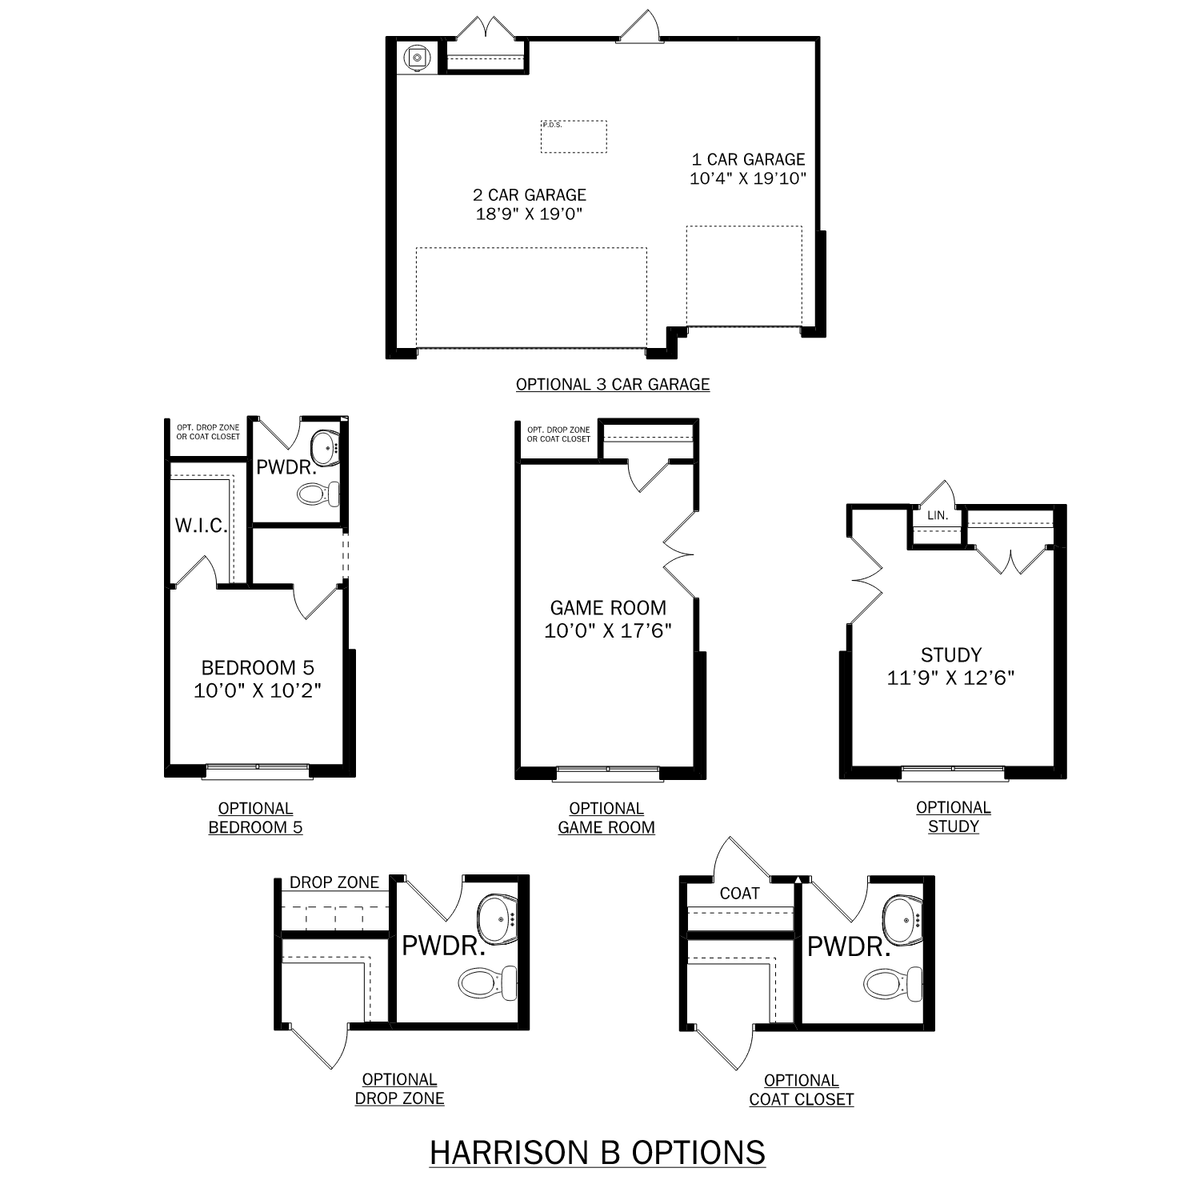 2 - The Harrison B buildable floor plan layout in Davidson Homes' River Road Estates community.